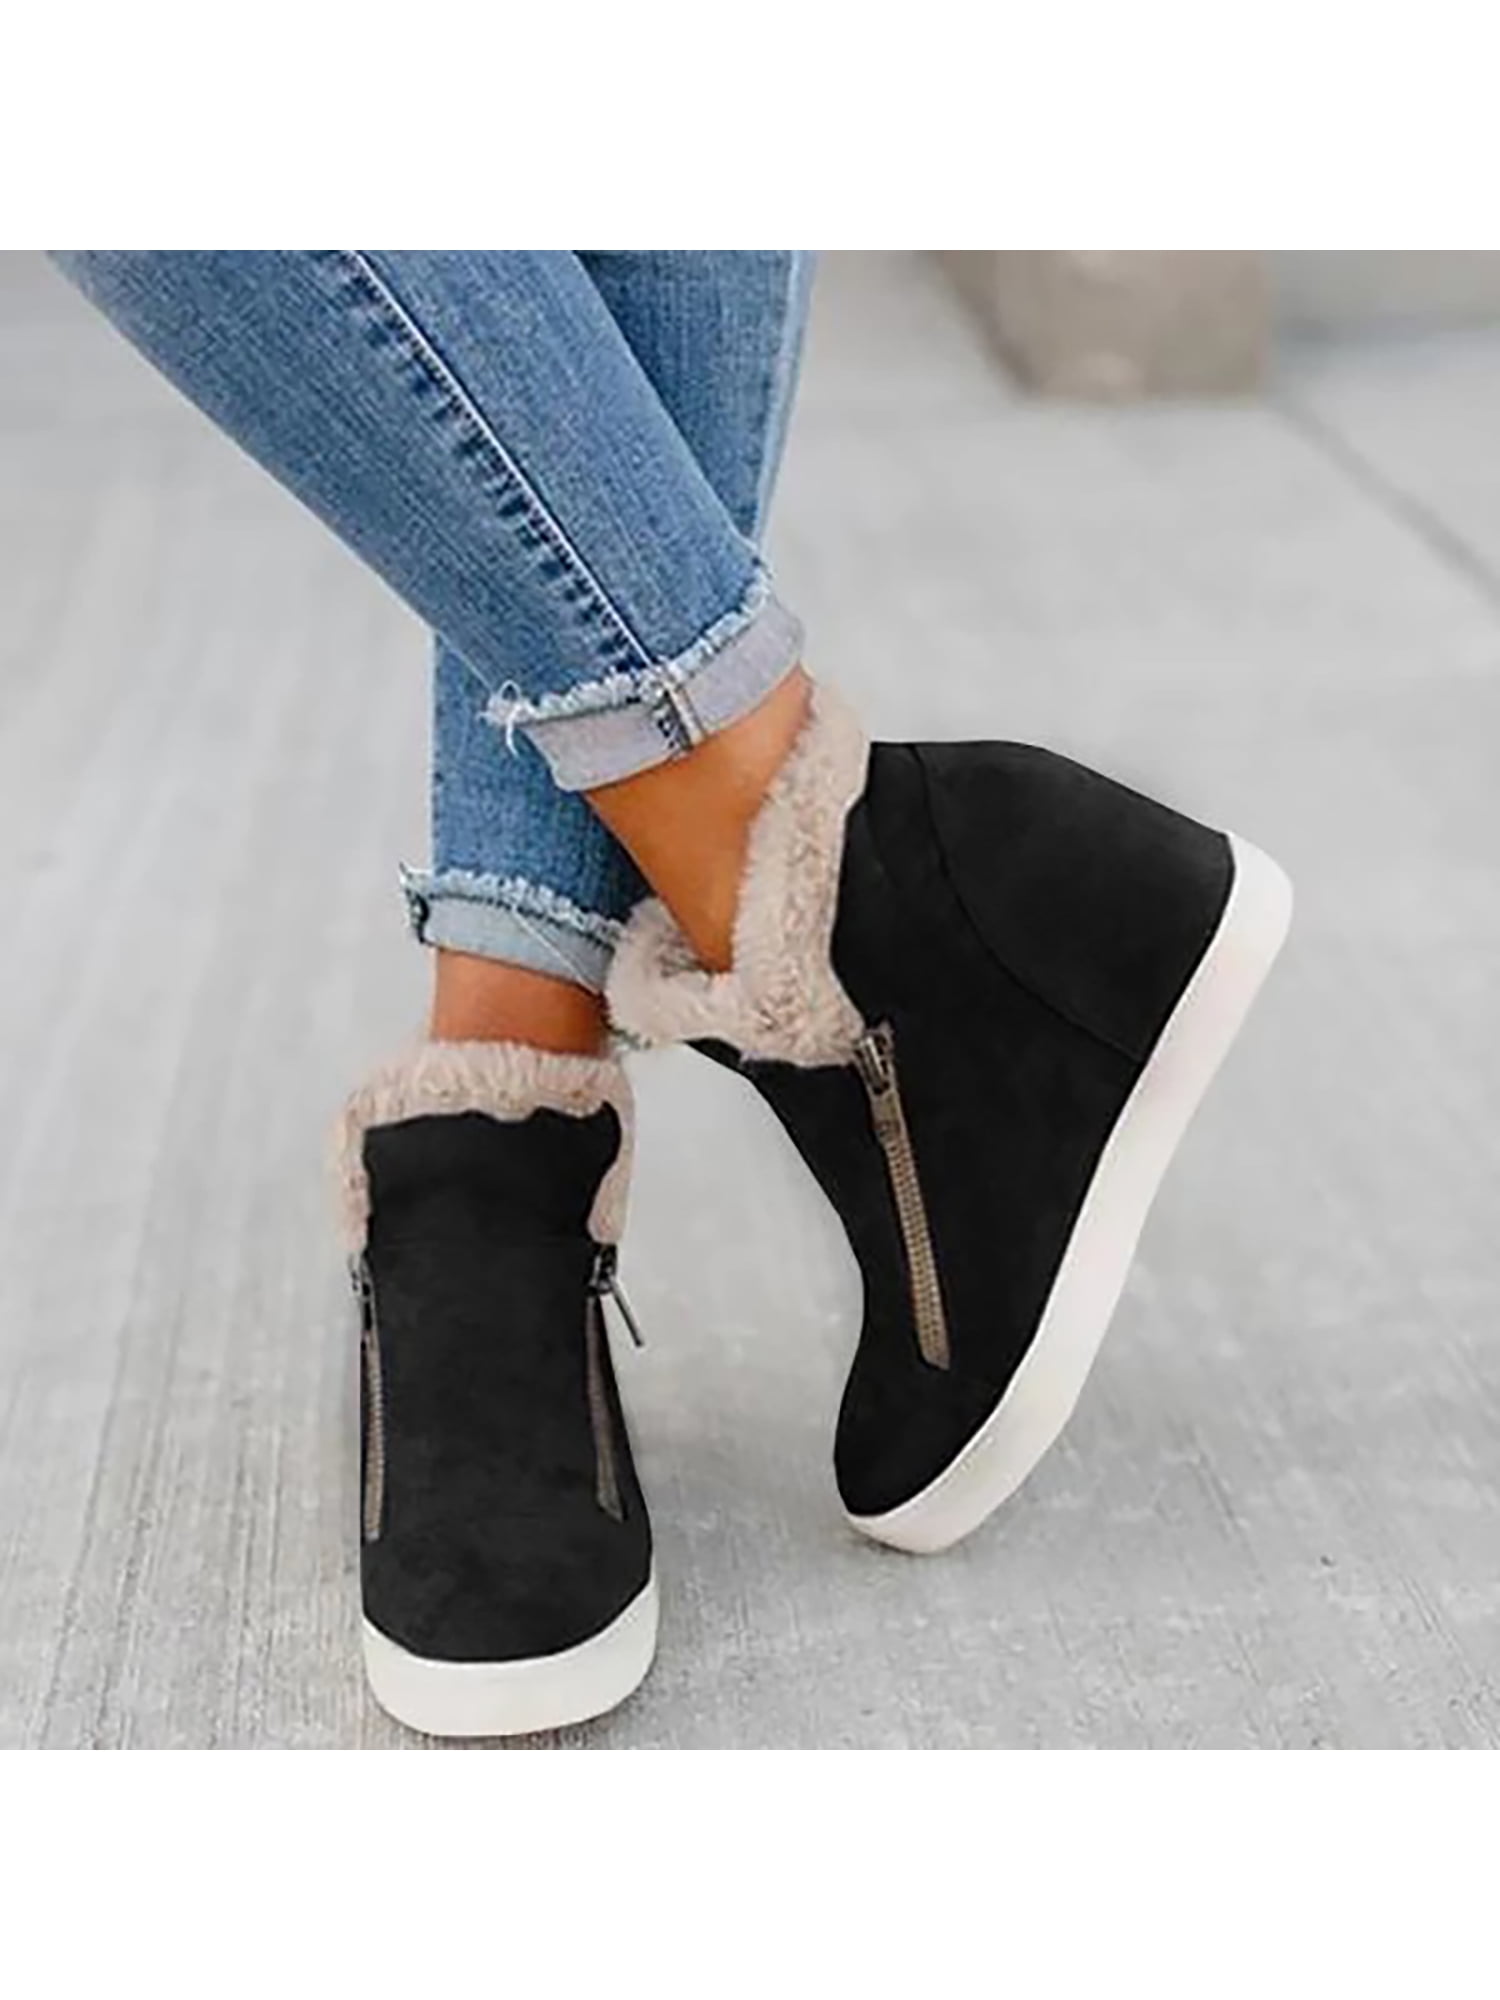 Winter warm Womens round toe Bow Tie Flat hidden wedge heels Casual Ankle Boots 